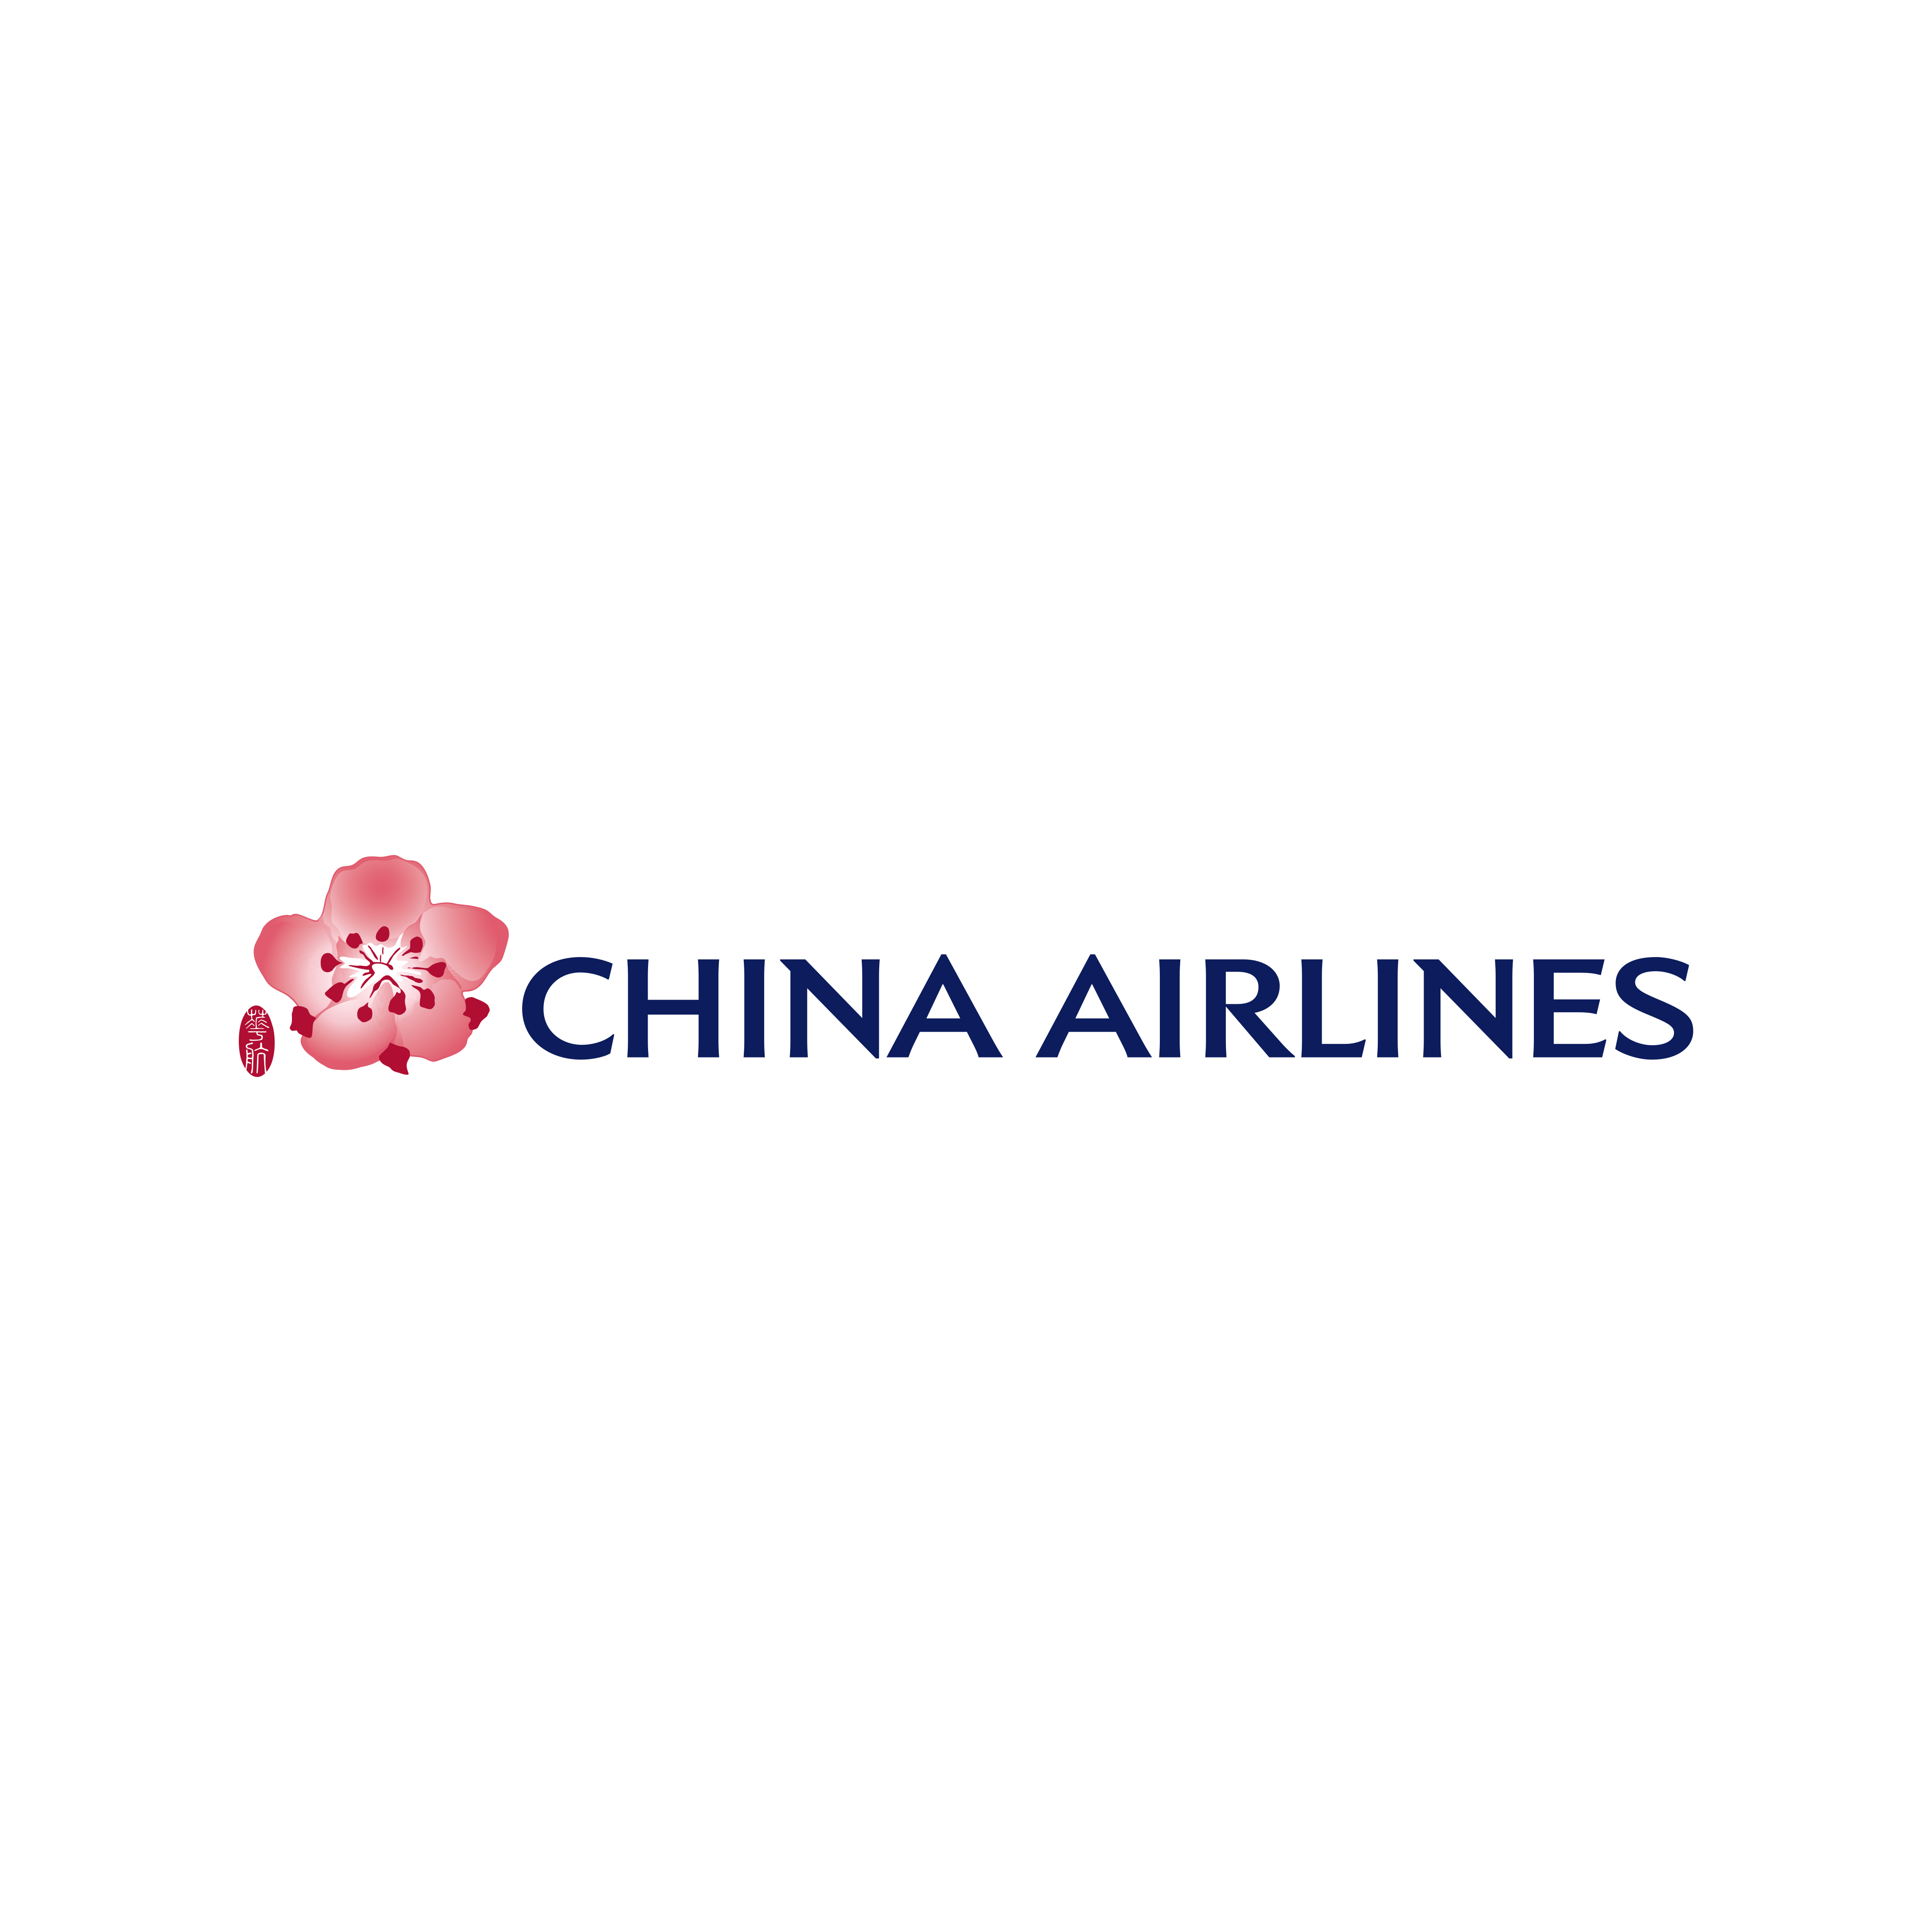 China Airlines Logo PNG.